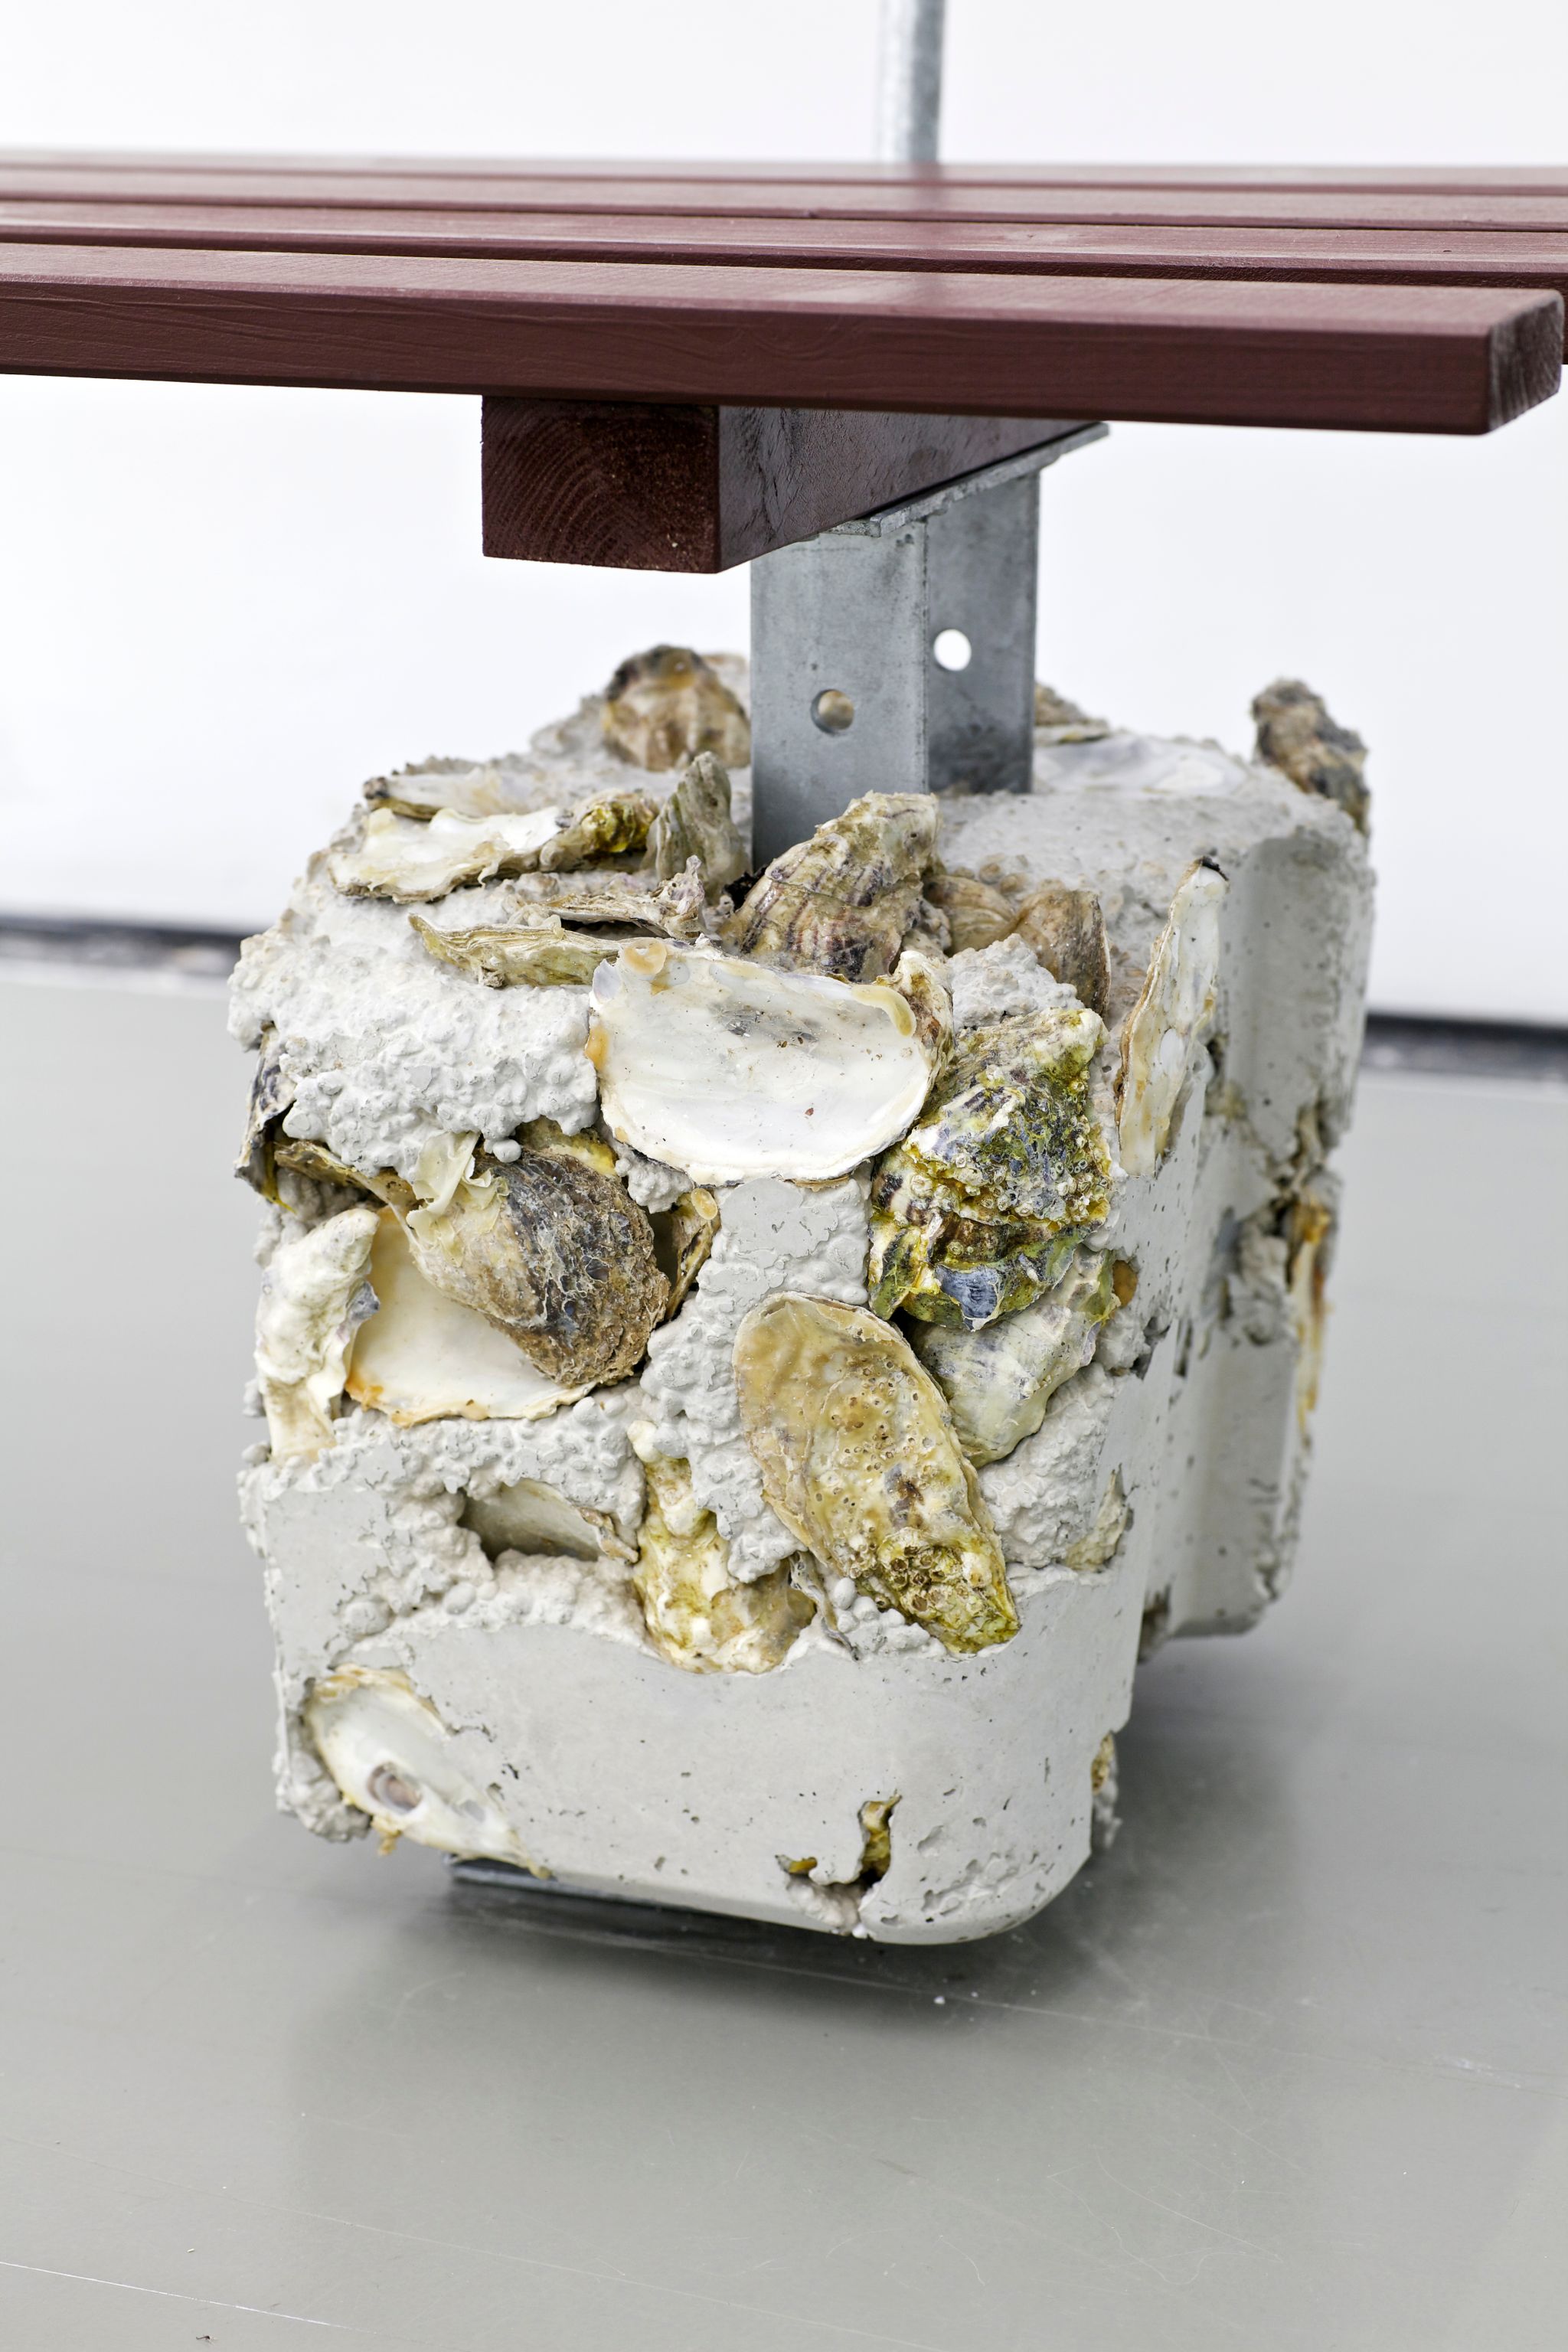 Gerry Bibby, LONDON BROWN II (+4475069767627) (detail), 2014, Concrete, oyster shells, metal, wood, lacquer, brass, 83 ⁠× ⁠124 ⁠× ⁠46 ⁠⁠cm